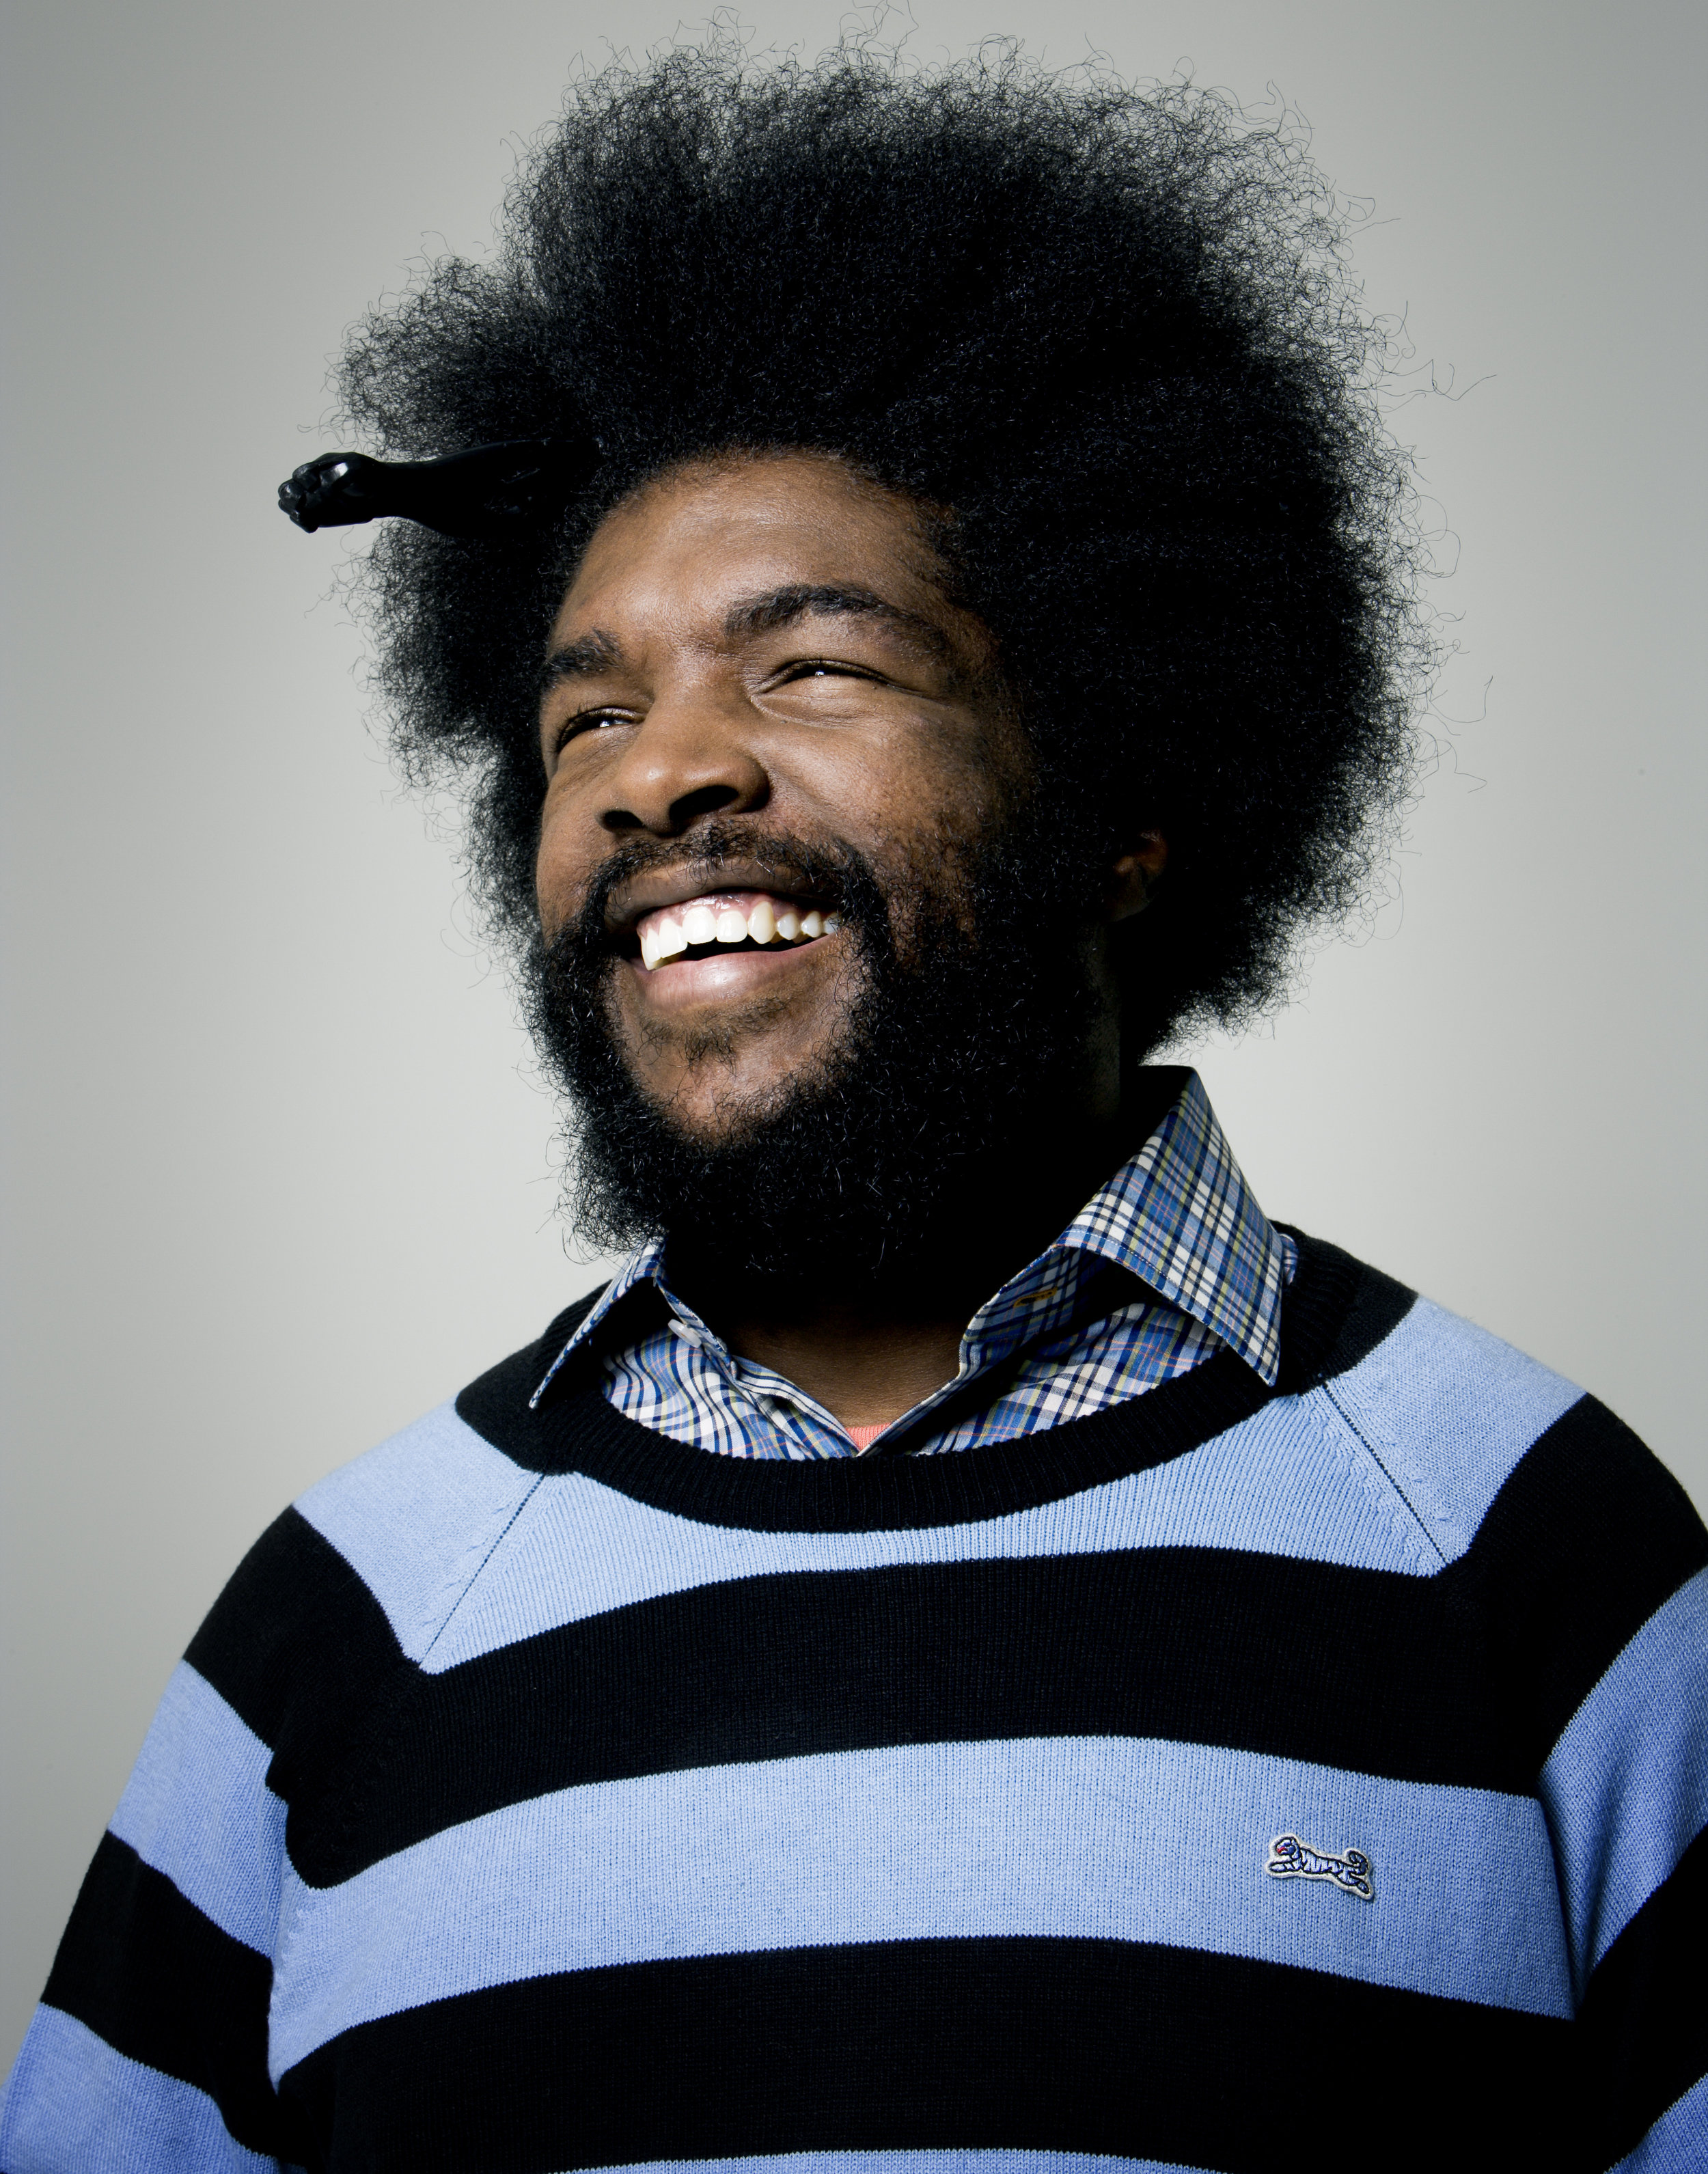 Questlove (The Roots), New York City, 2006